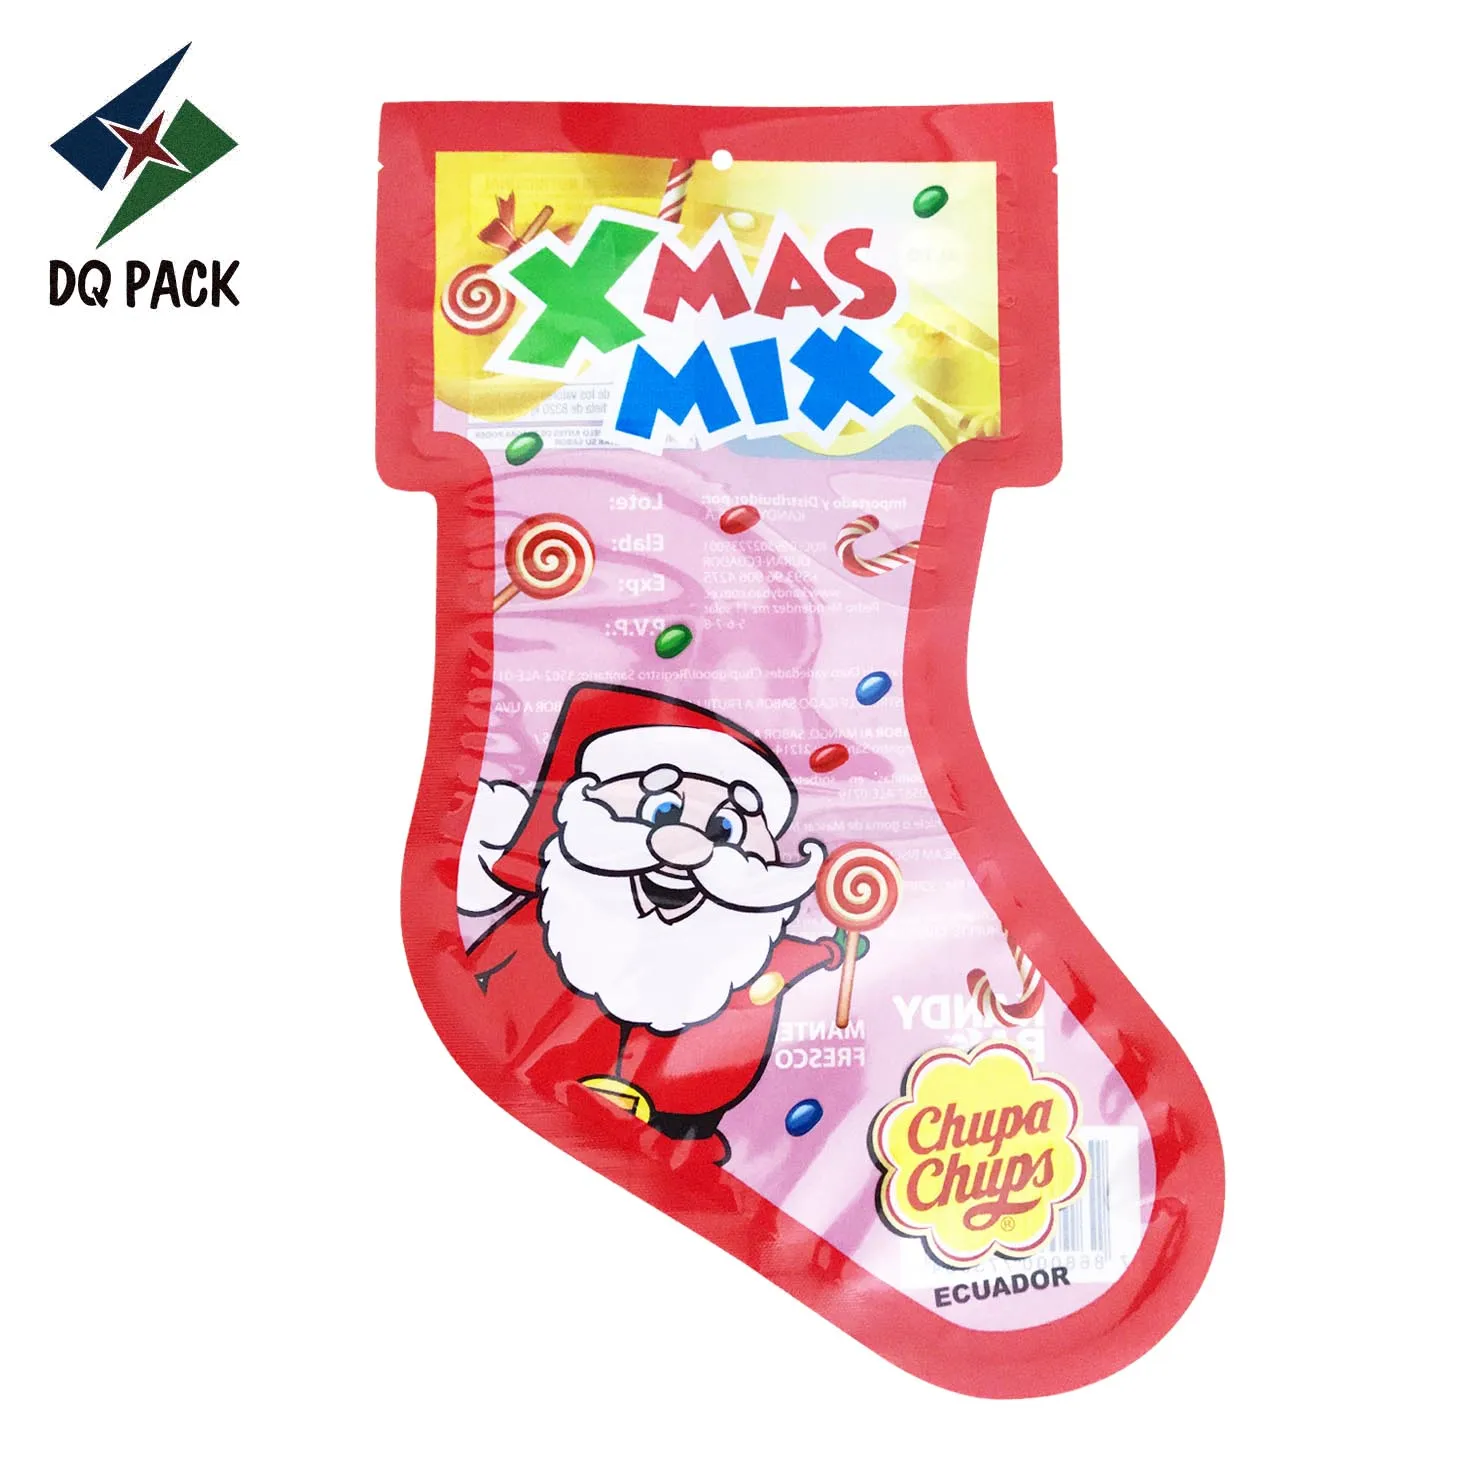 Xmas Candy Pouch Christmas Gifts Irregular Sugar Pouch Snack Shaped Sachet